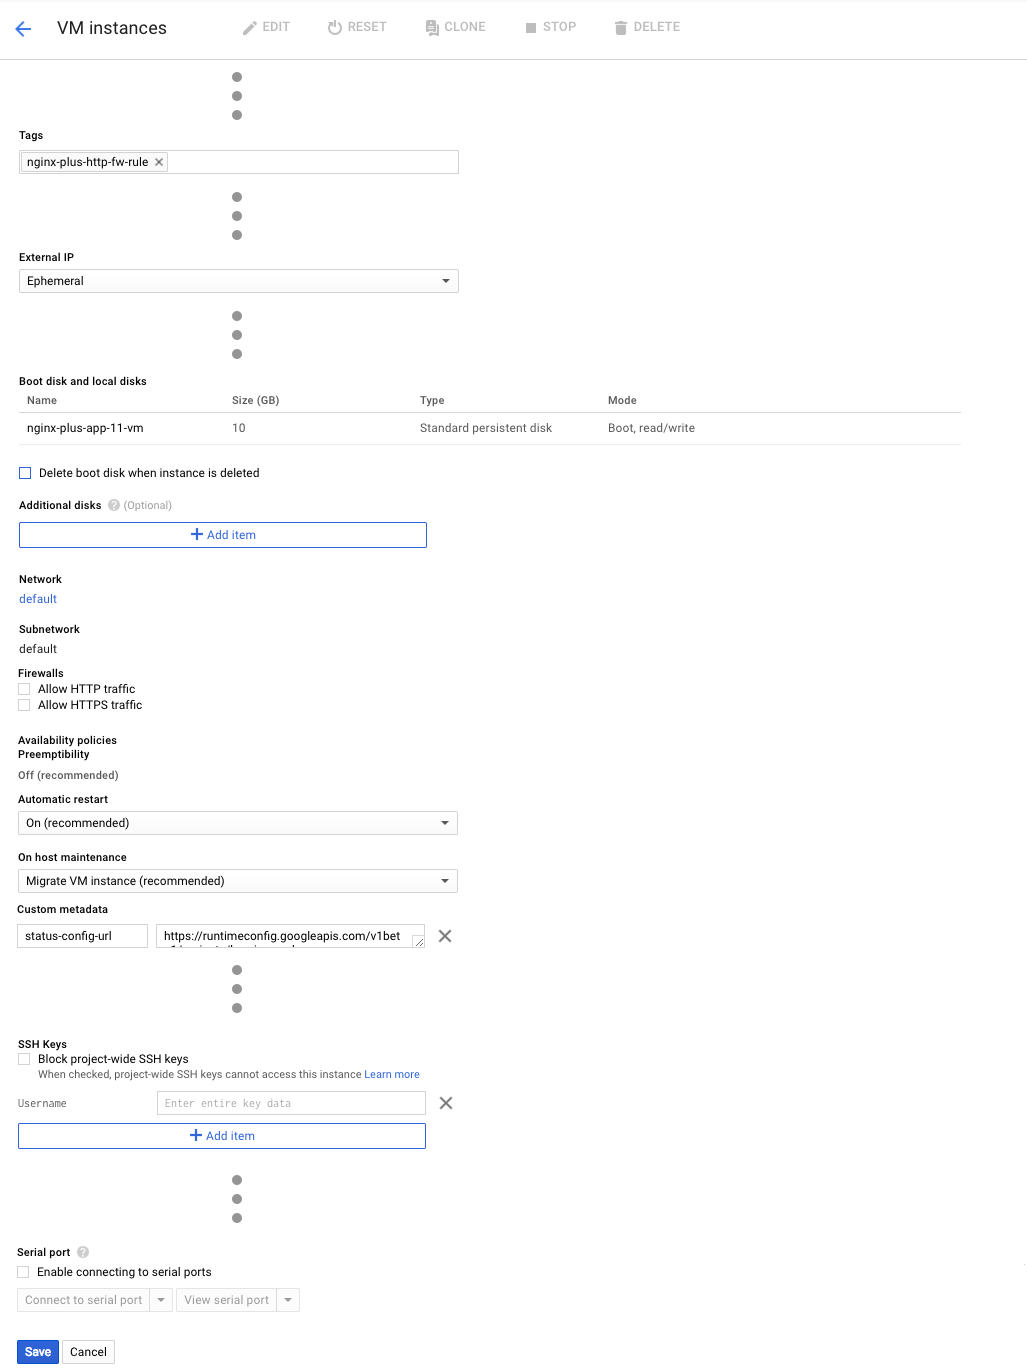 Screenshot showing the configuration modifications for a VM instance being deployed as part of setting up NGINX Plus as the Google load balancer.